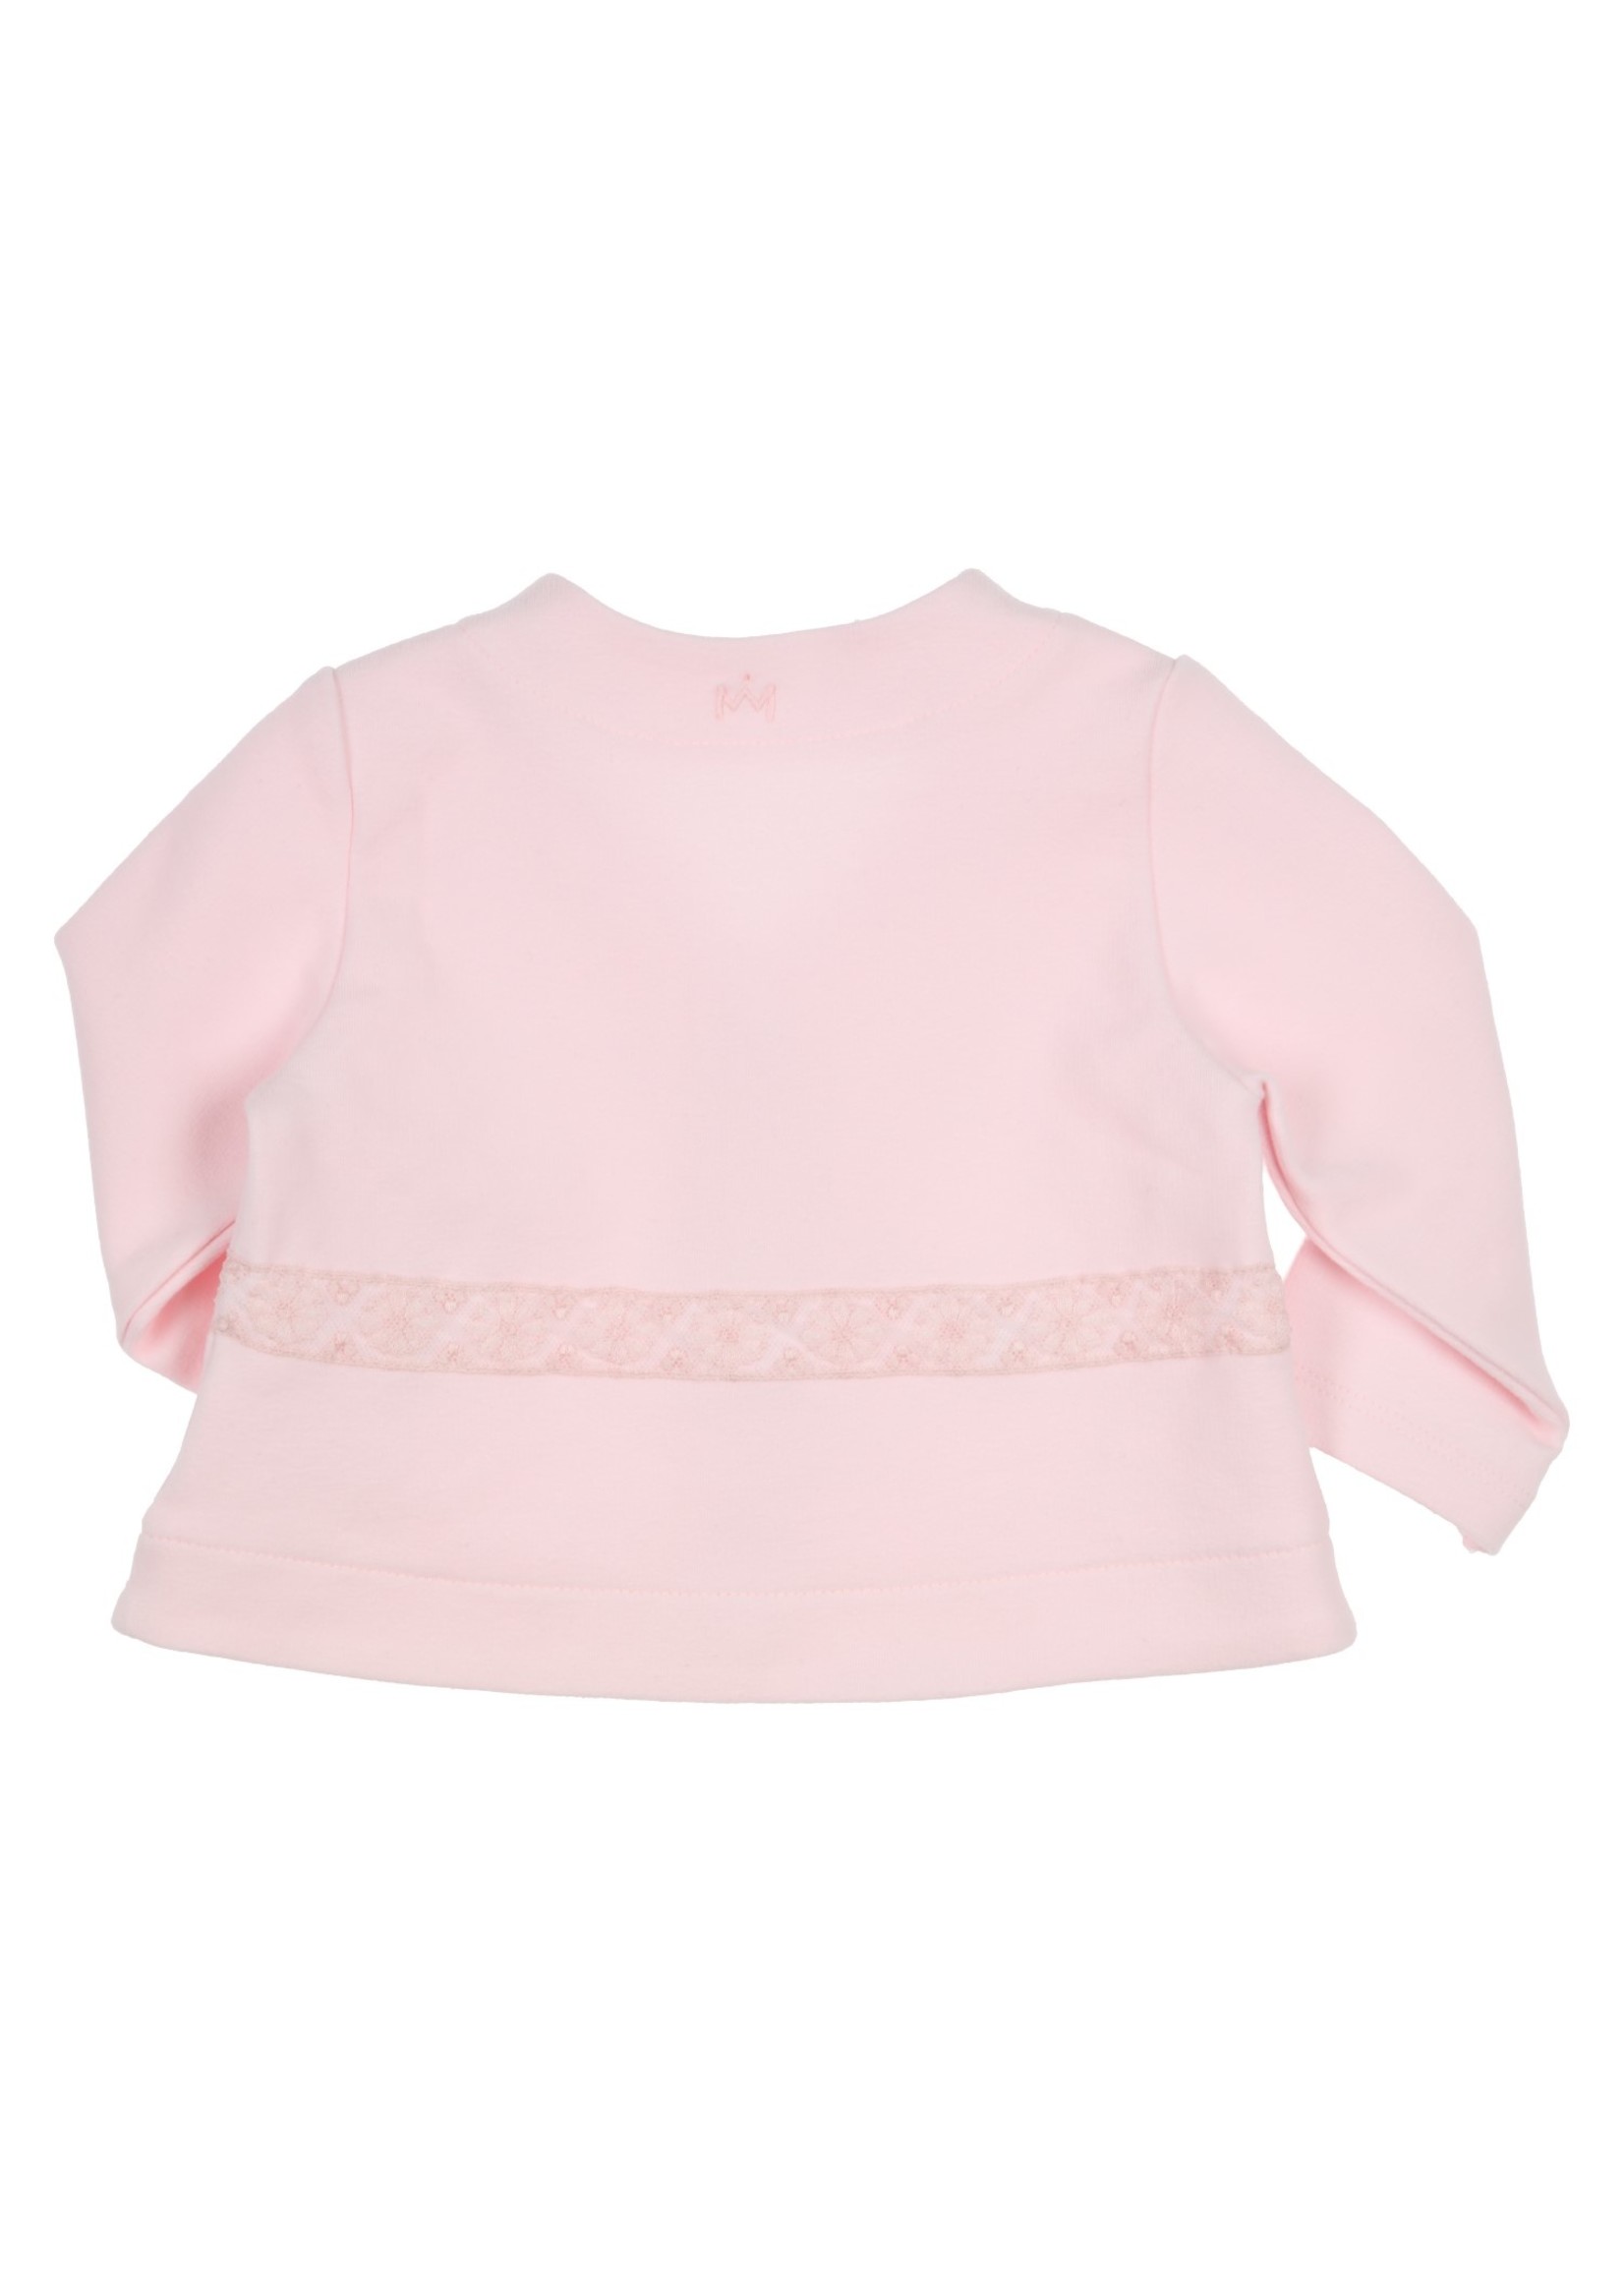 Gymp CARDIGAN - LACE AND BOW - CARB VIEUX-ROSE